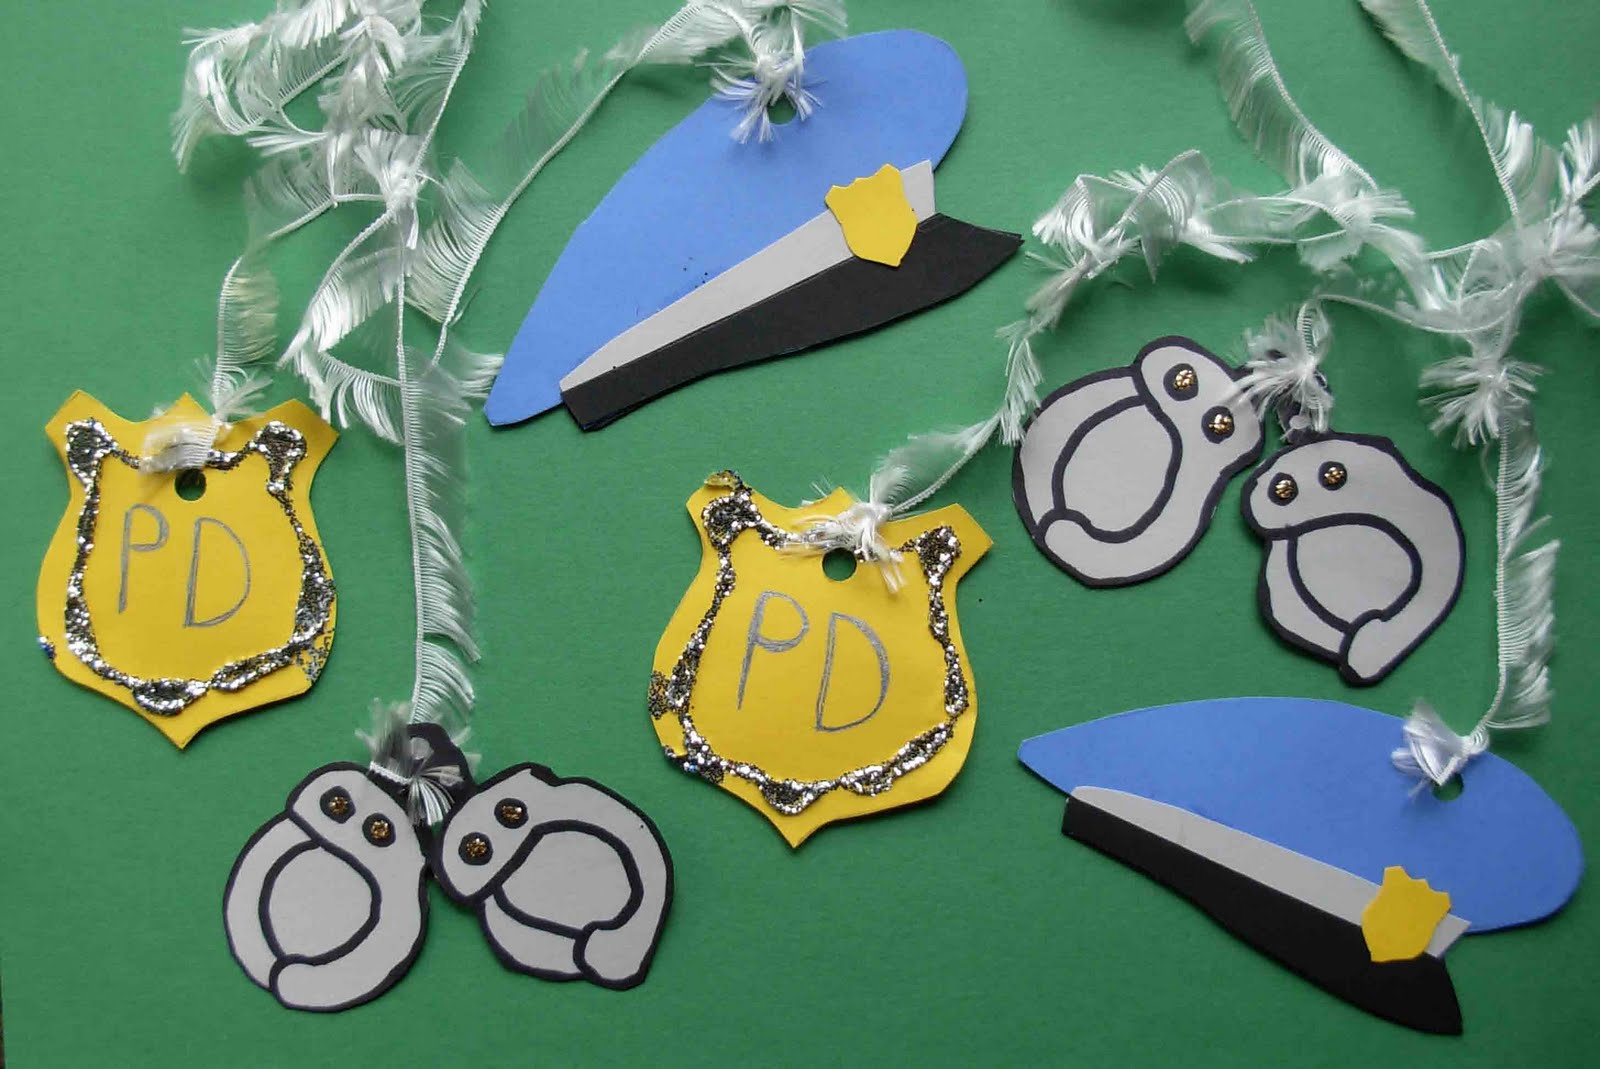 crack-of-dawn-crafts-police-party-decorations-printables